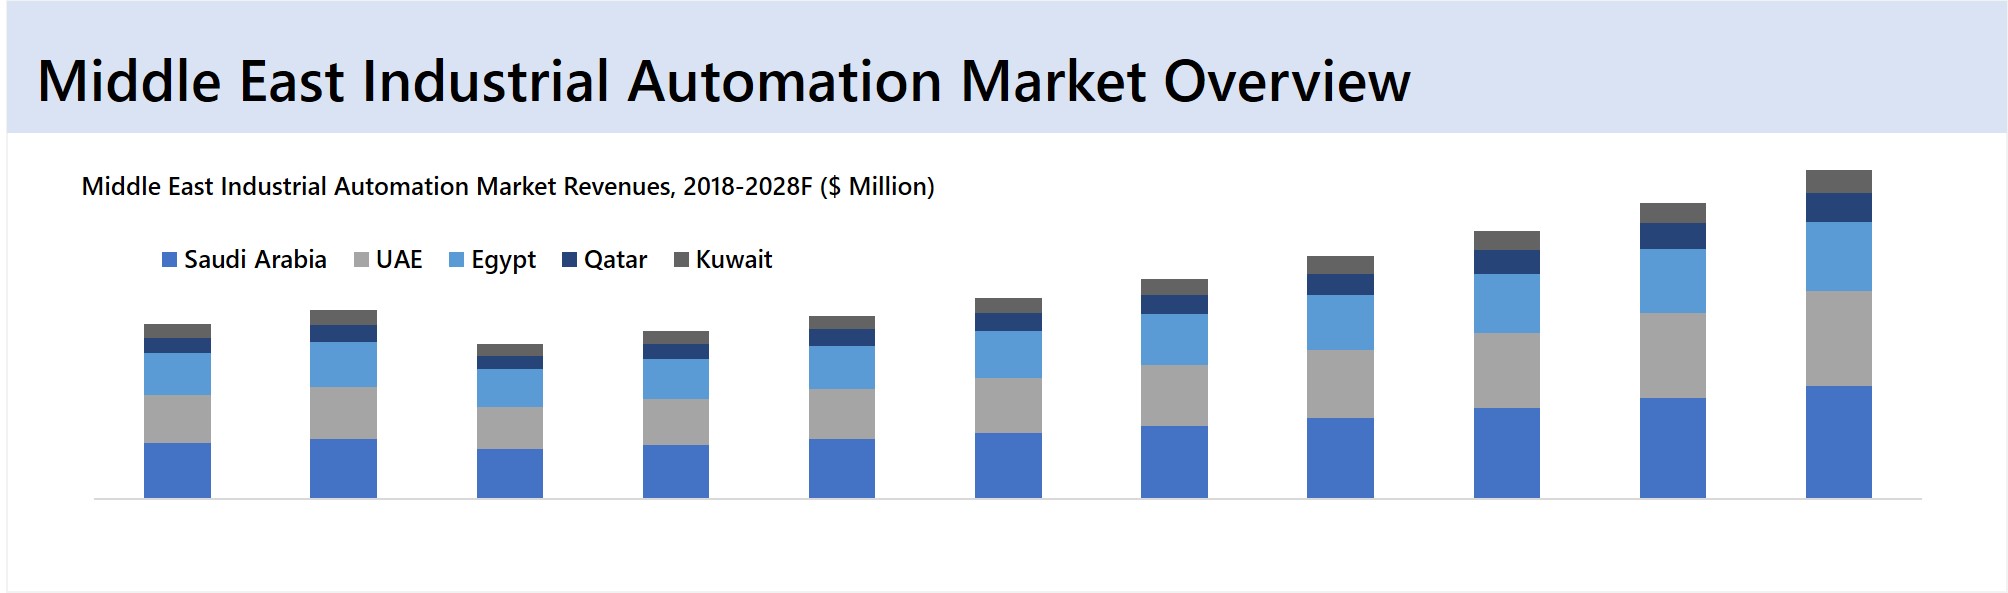 Middle East Industrial Automation Market